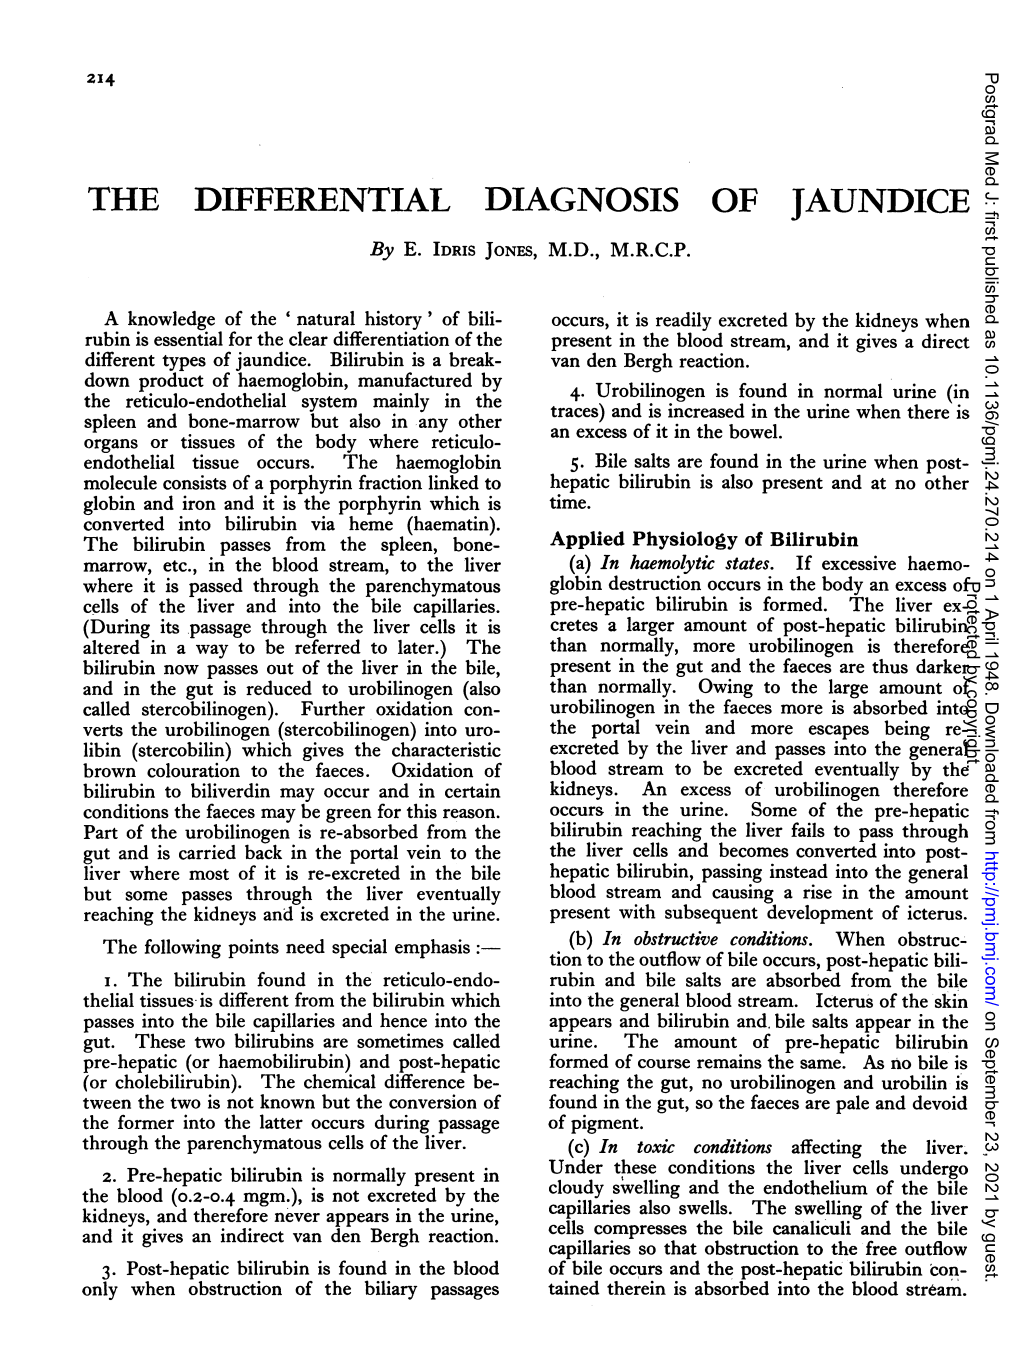 THE DIFFERENTIAL DIAGNOSIS of JAUNDICE by E